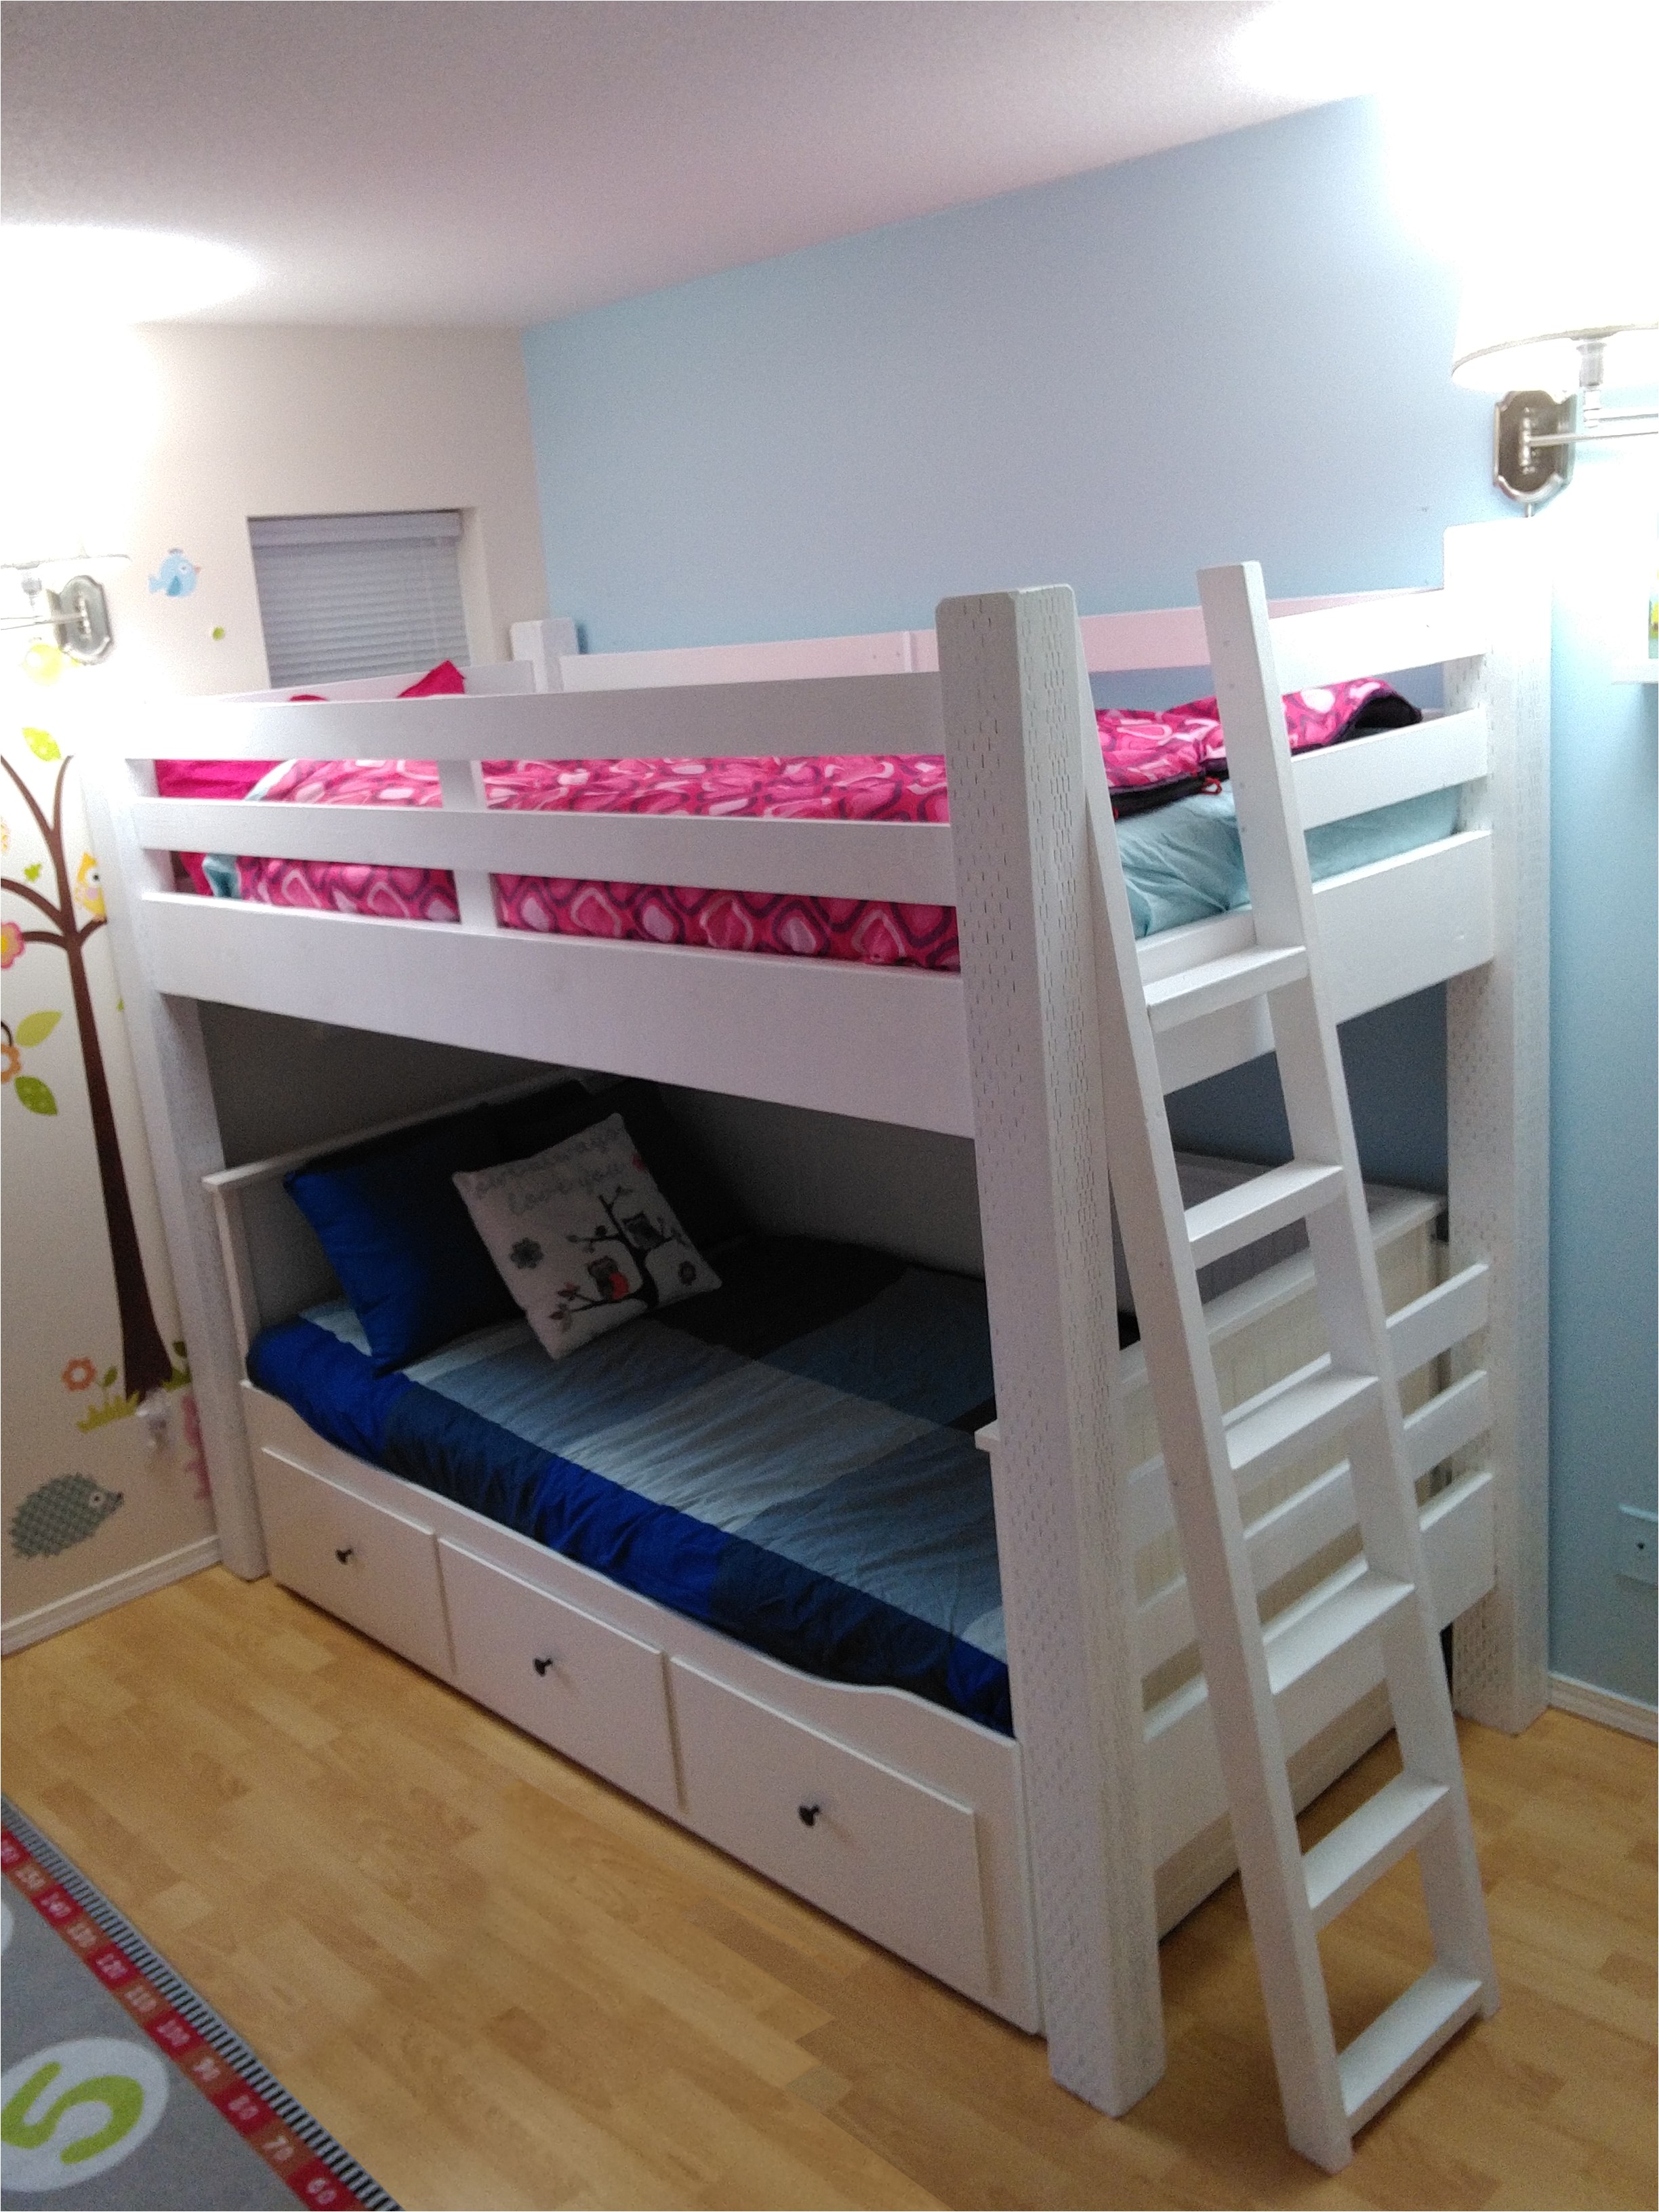 custom loft bed built to wrap the ikea hemnes daybed